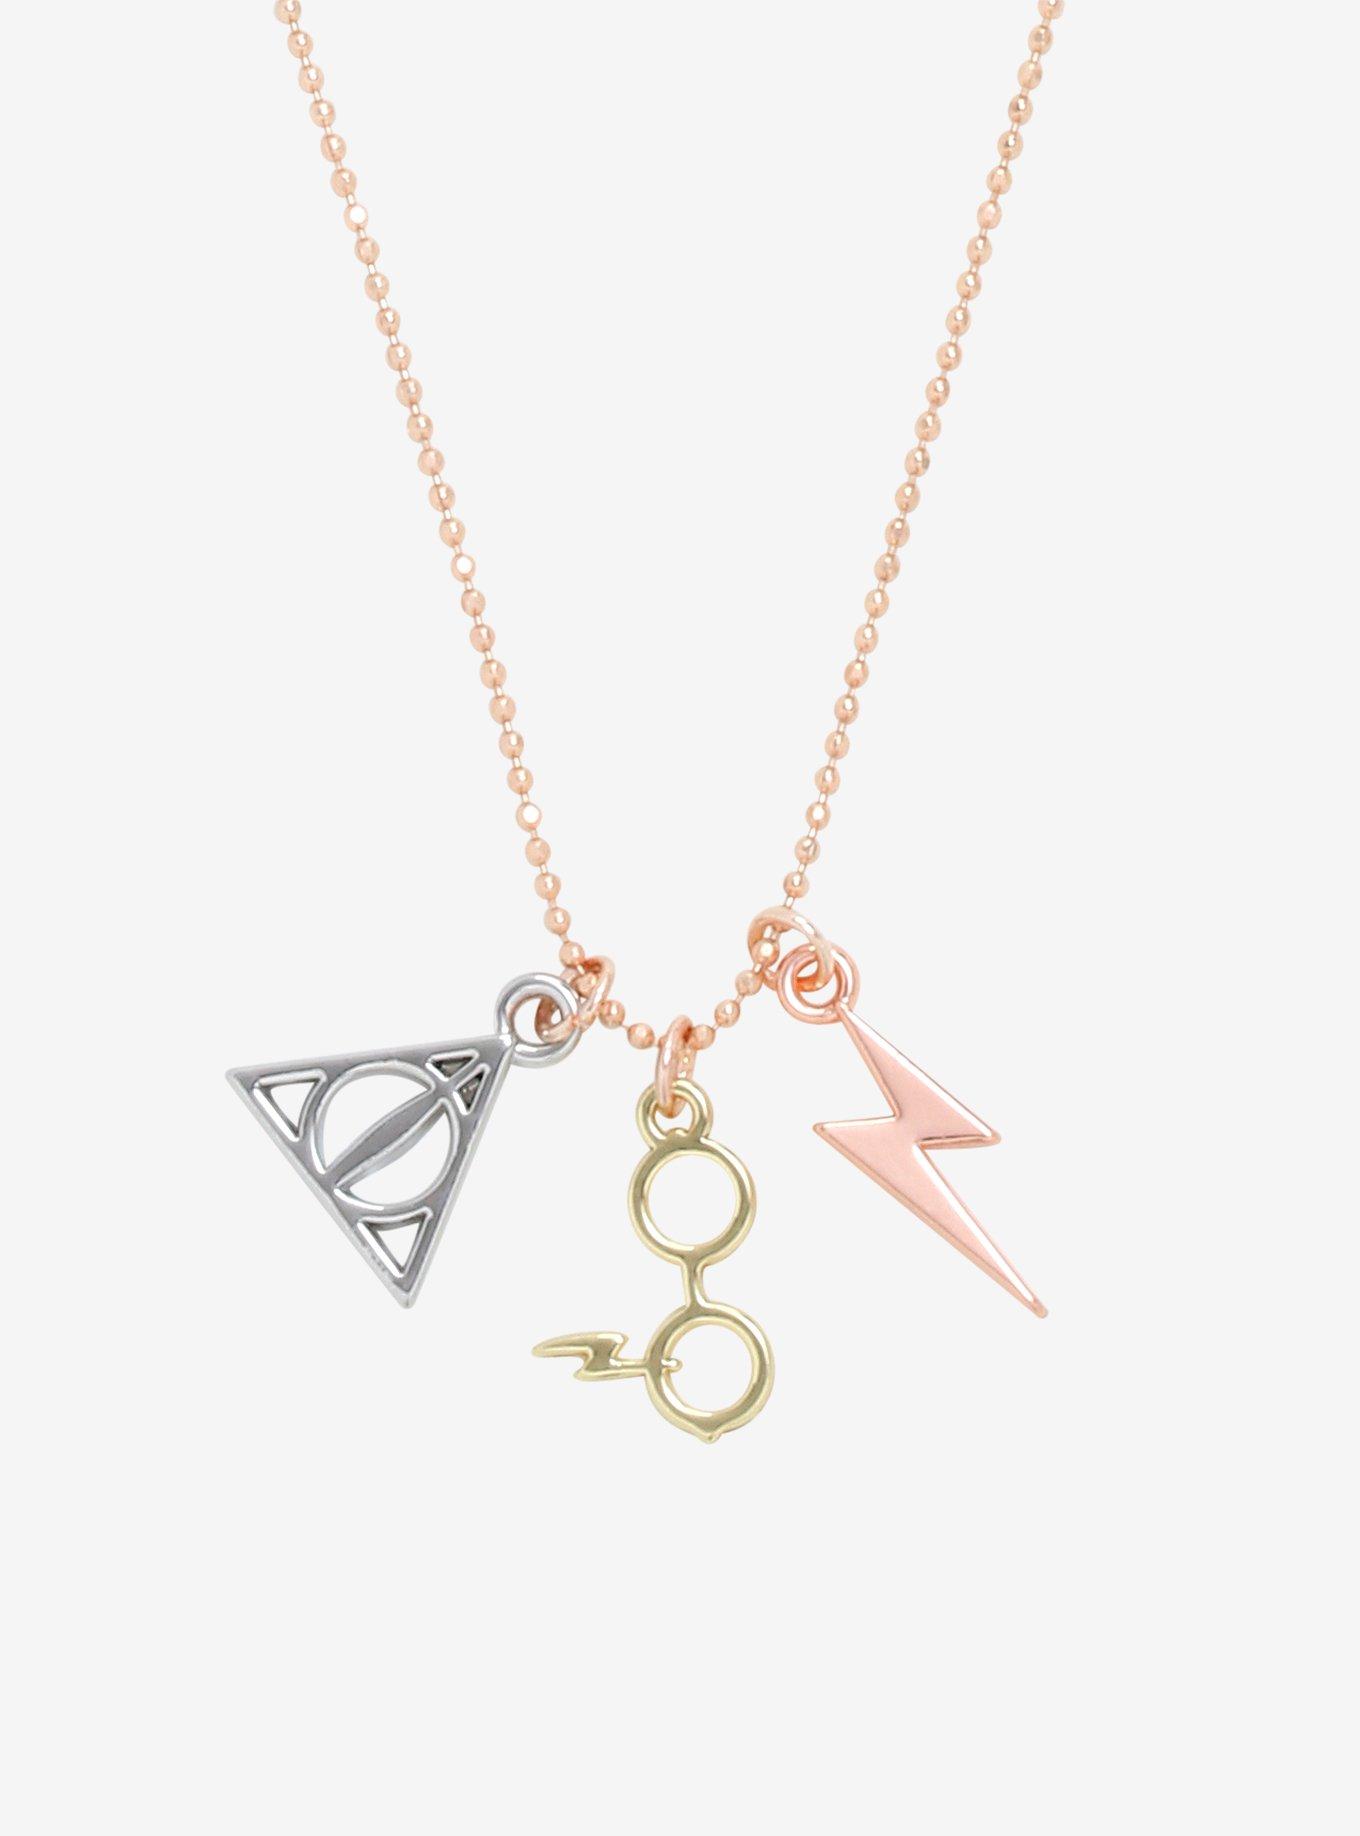 Harry Potter Dainty Charm Necklace, , hi-res